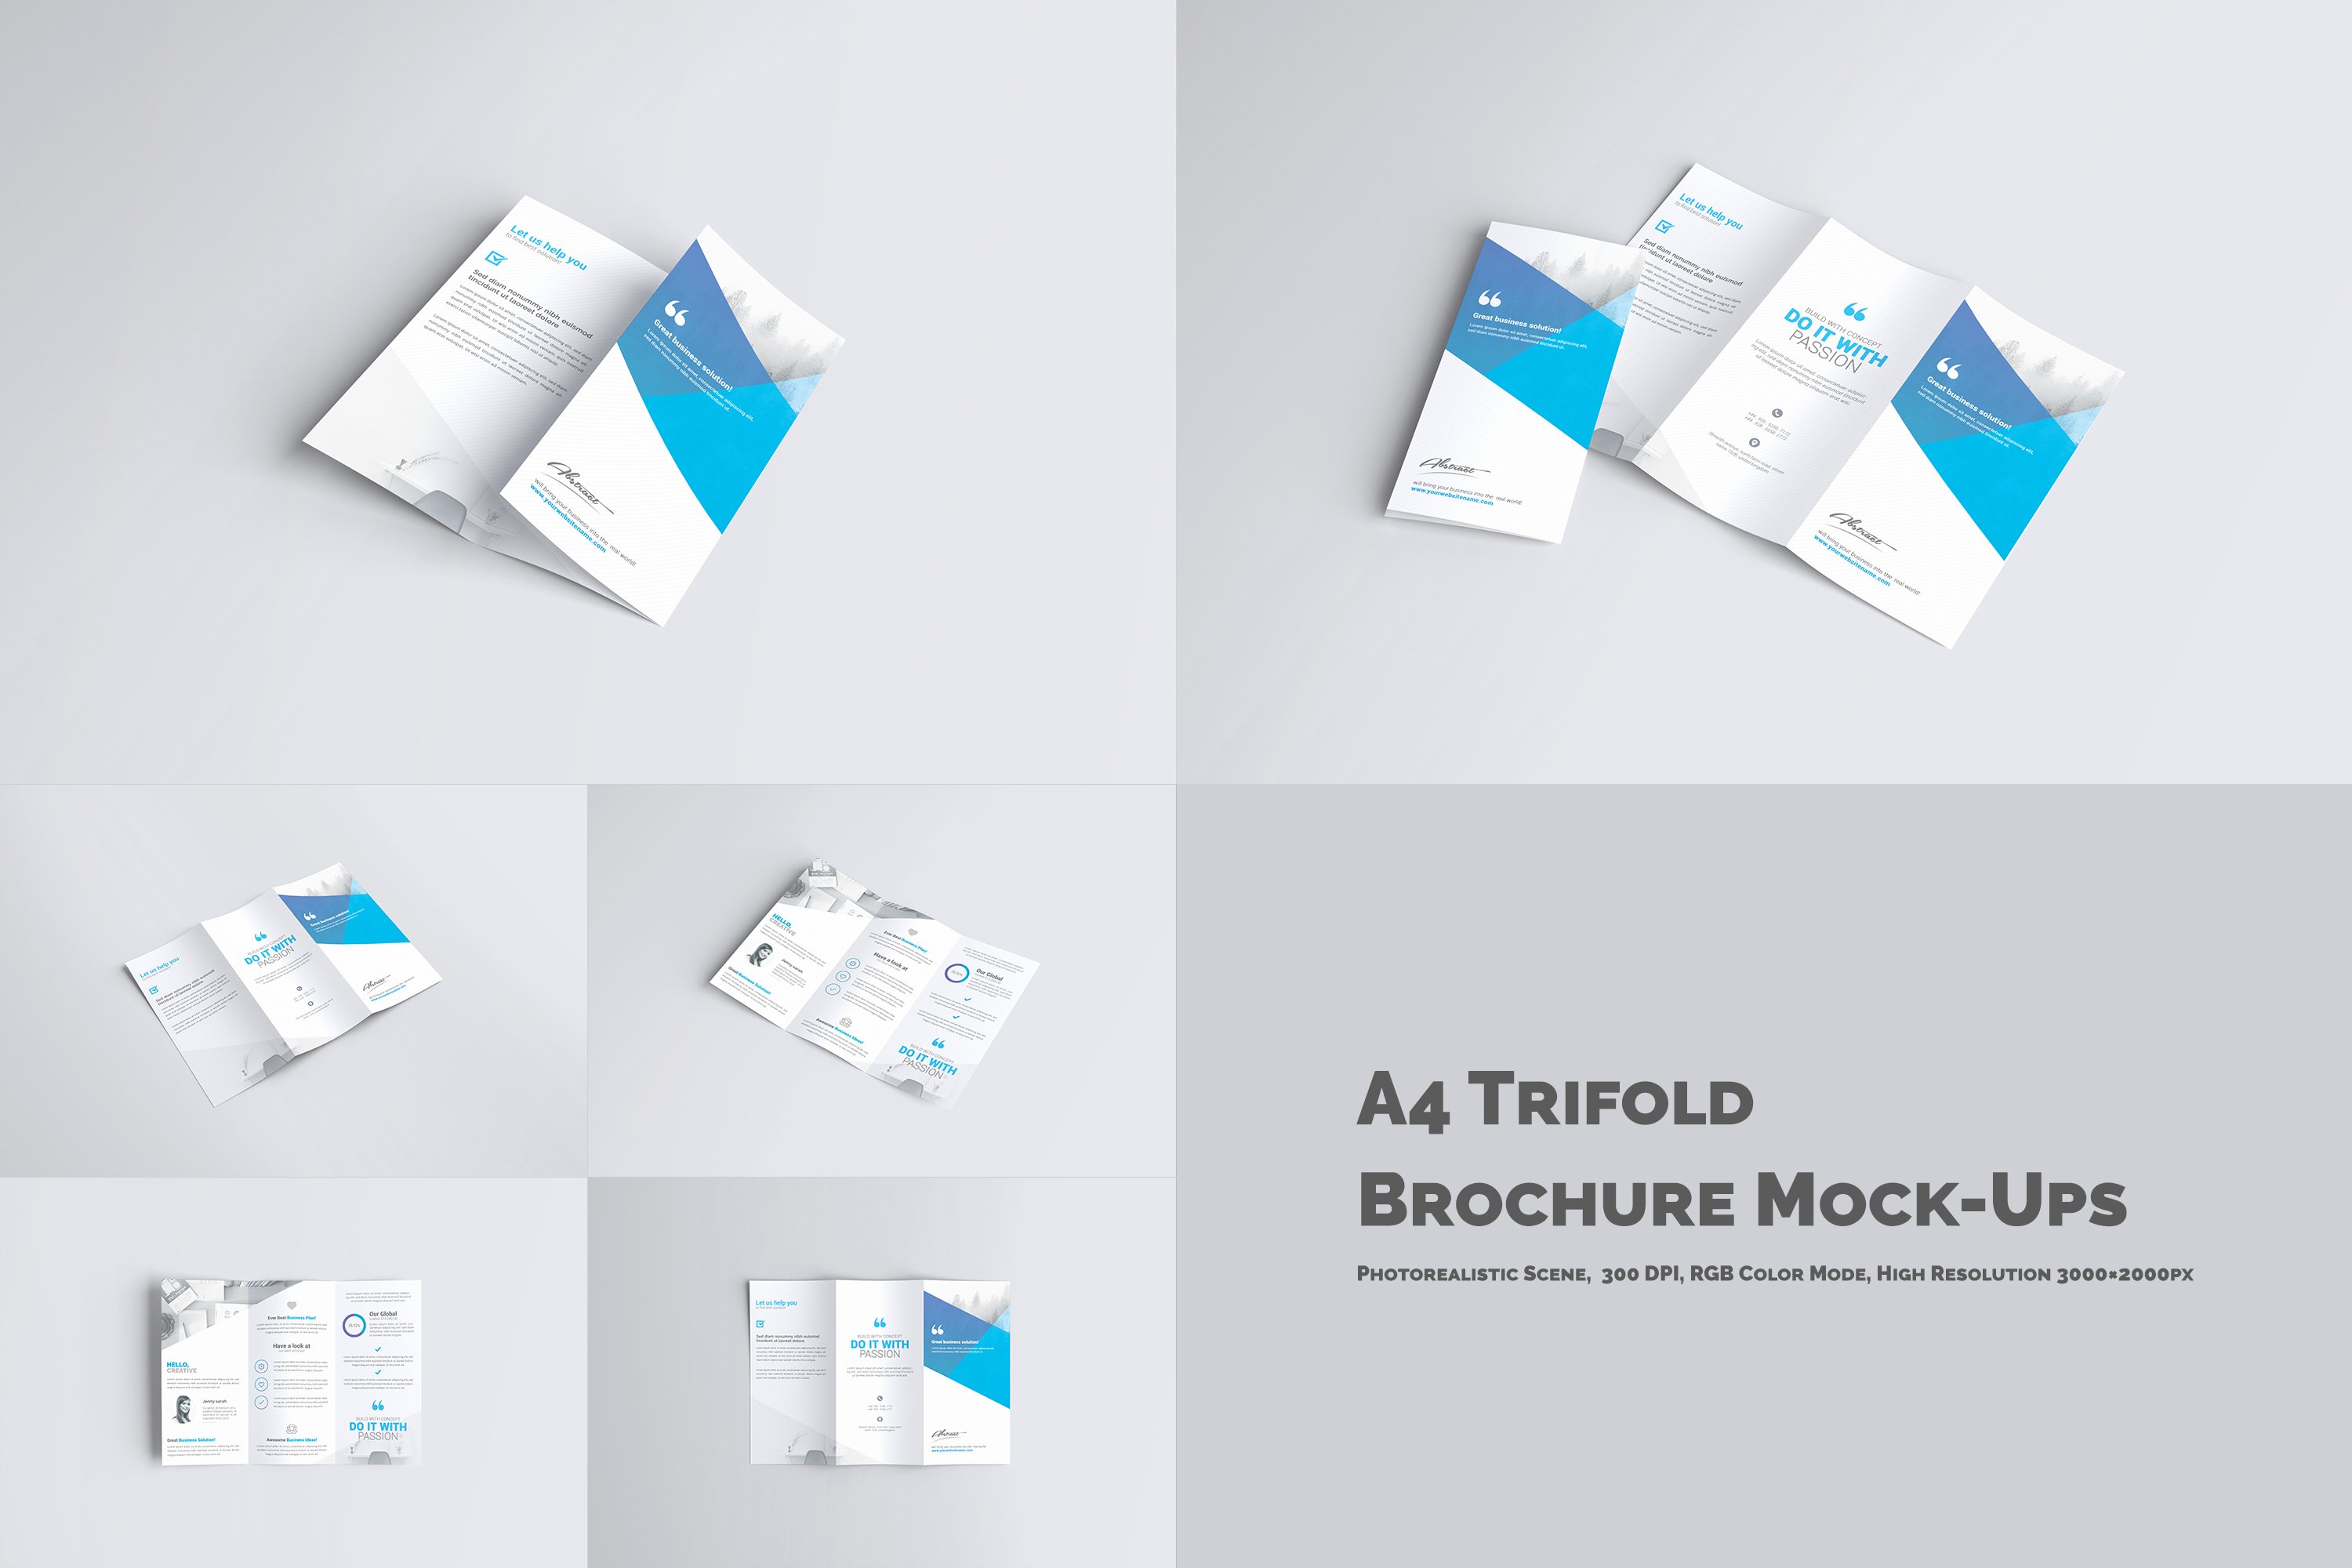 A4 Trifold Brochure Mock-Ups preview image.